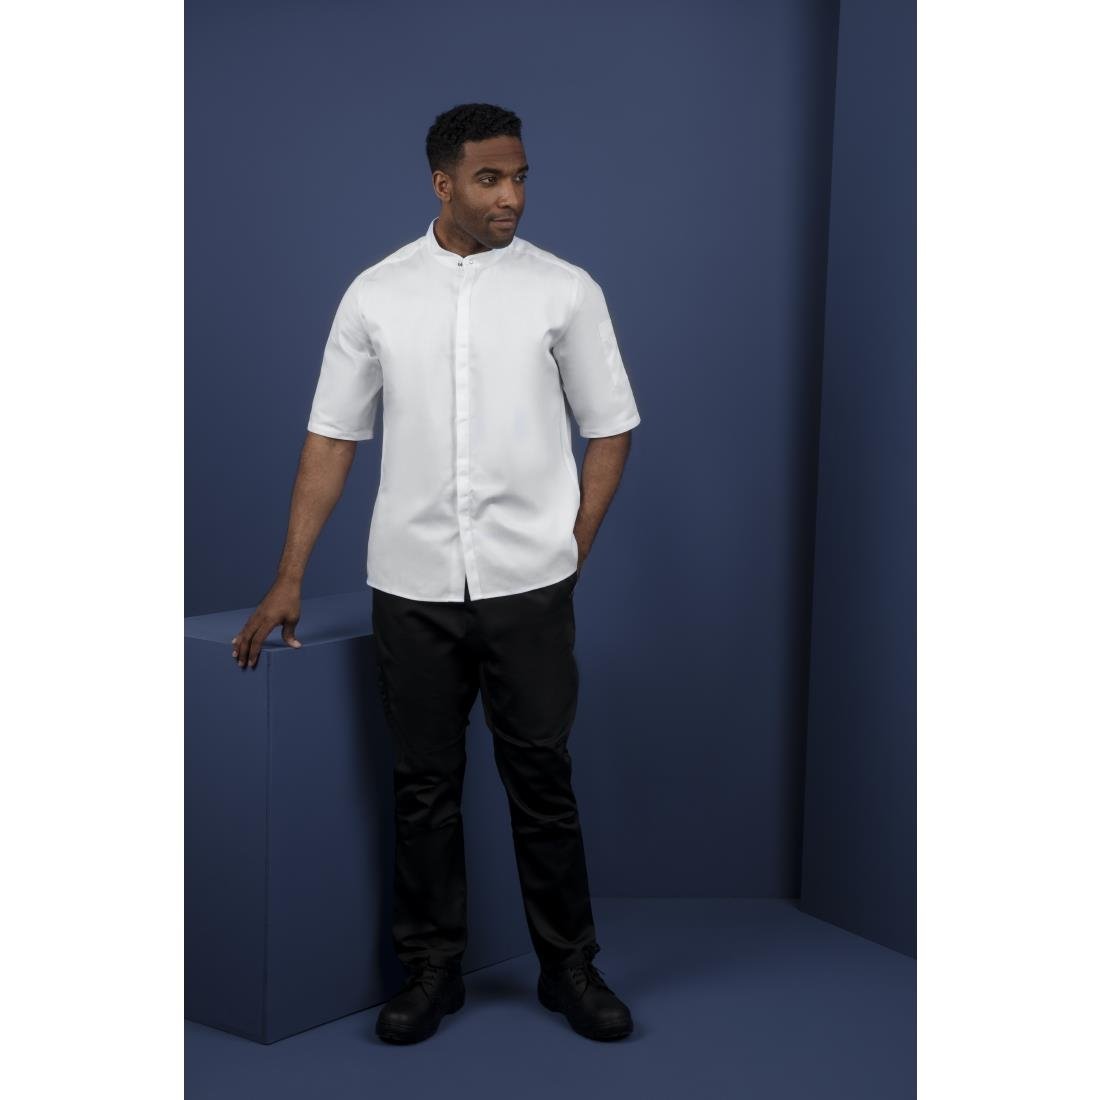 BB702-XL Southside Band Collar Chefs Jacket White Size XL JD Catering Equipment Solutions Ltd